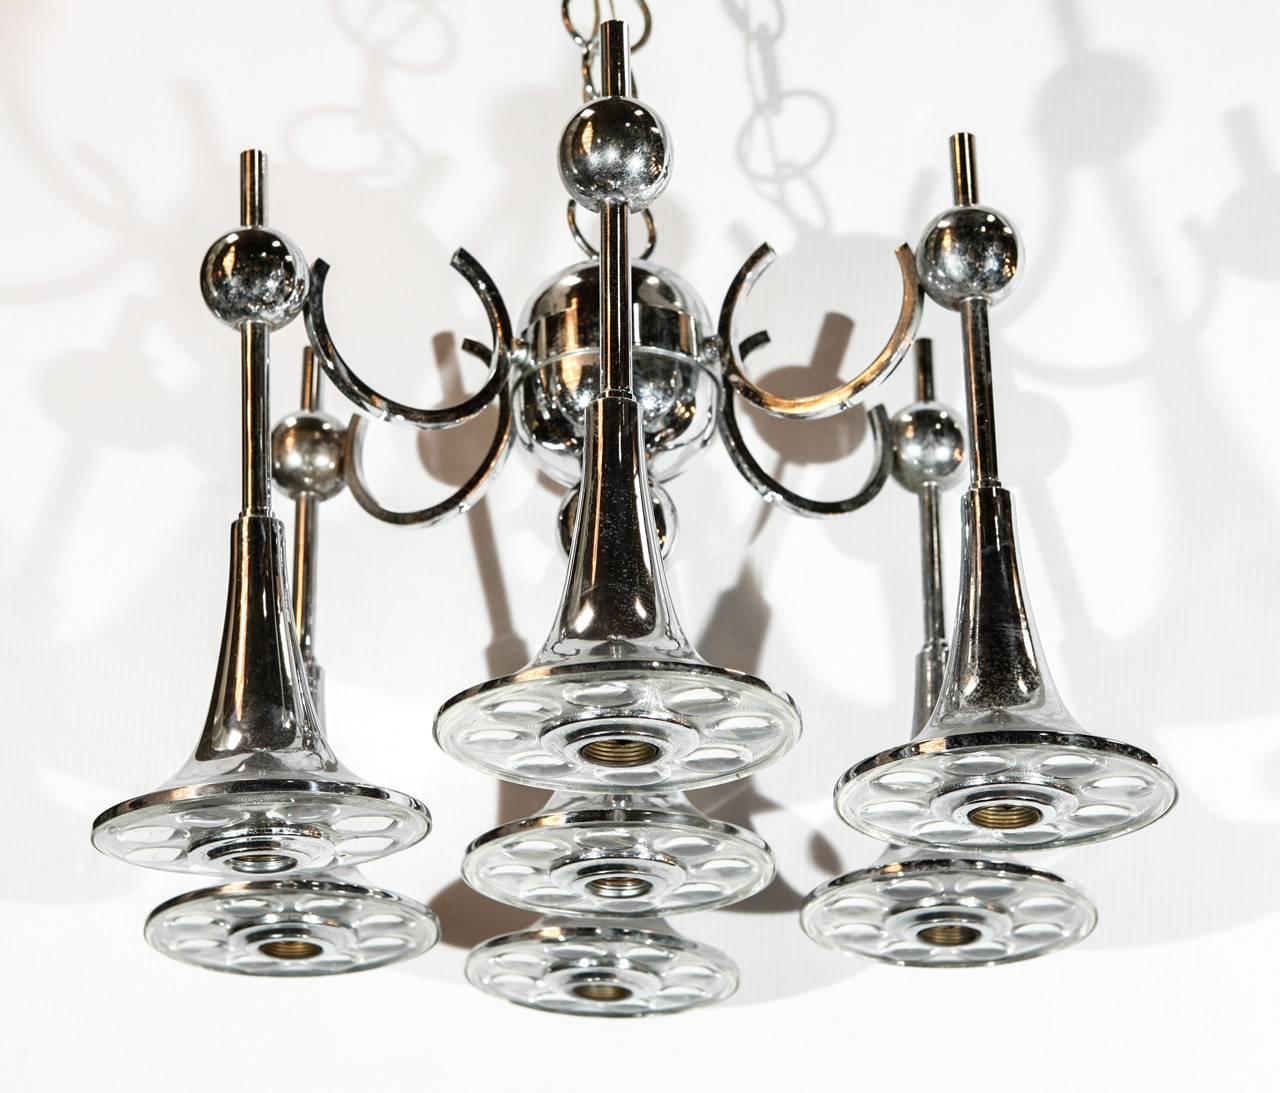 Vintage Italian chandelier made with seven clear Murano glasses and chrome metal / Designed by Gaetano Sciolari circa 1970’s / Made in Italy
7 lights / E12 or E14 type / max 40W each
Diameter: 19 inches / Height: 12 inches plus chain and canopy
1 in